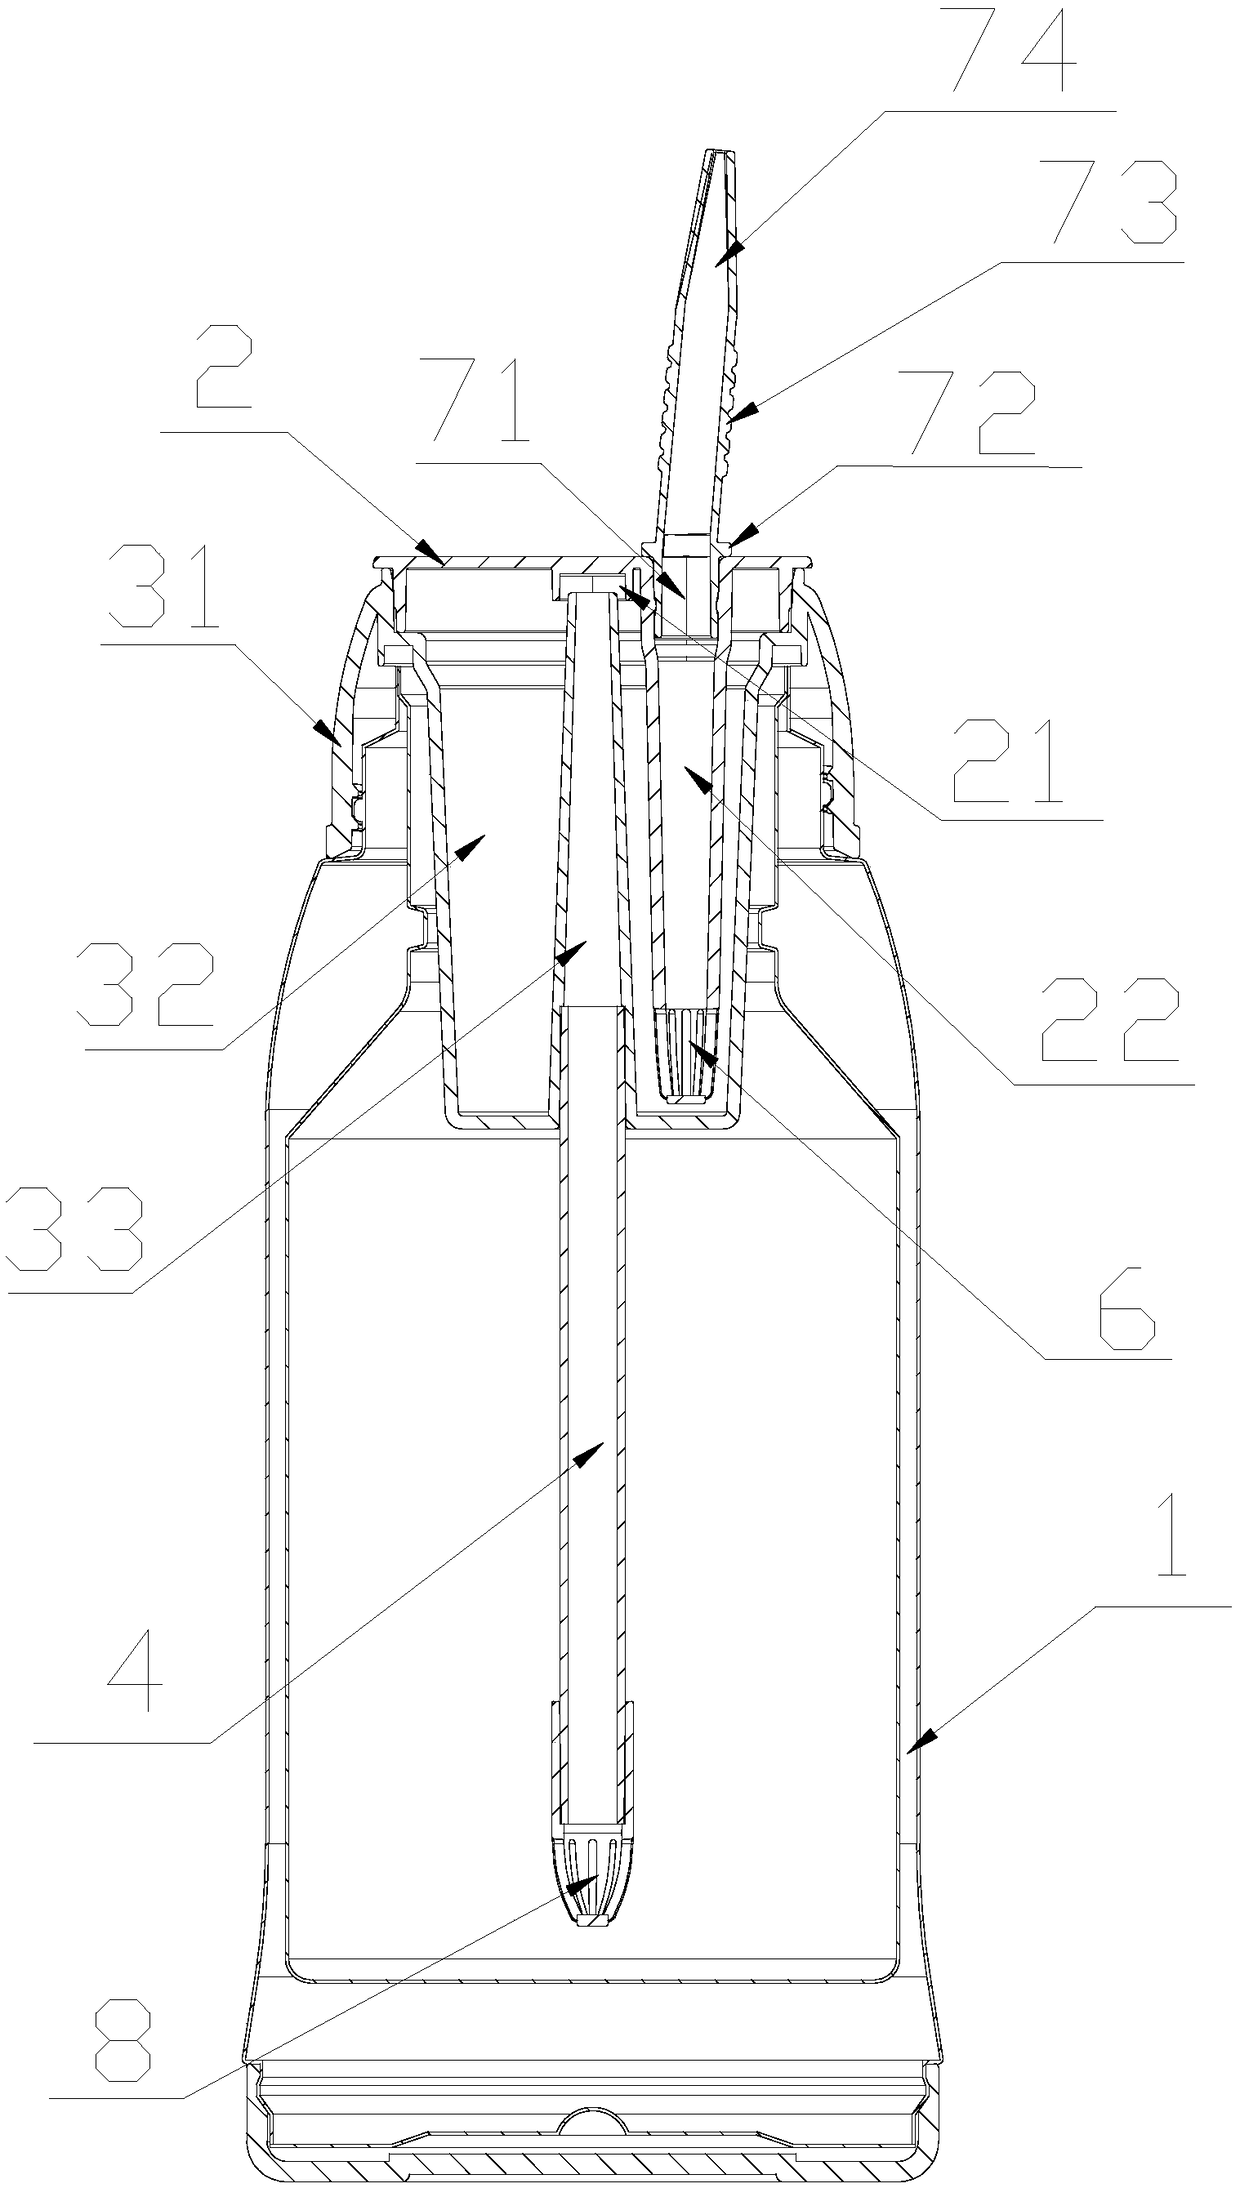 Cup with filtering device